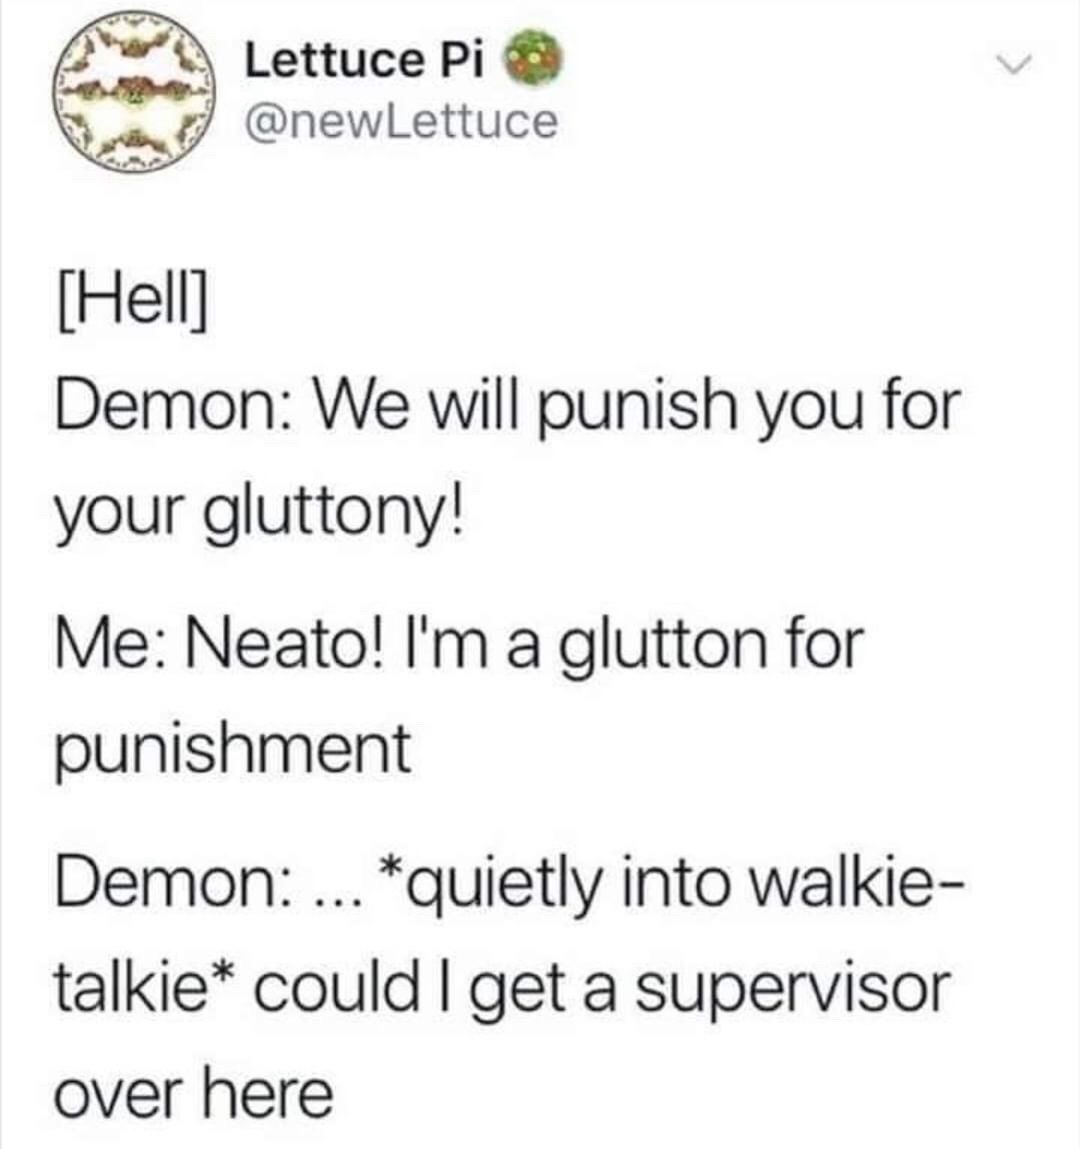 demon glutton meme - Lettuce Pia Hell Demon We will punish you for your gluttony! Me Neato! I'm a glutton for punishment Demon ... quietly into walkie talkie could I get a supervisor over here